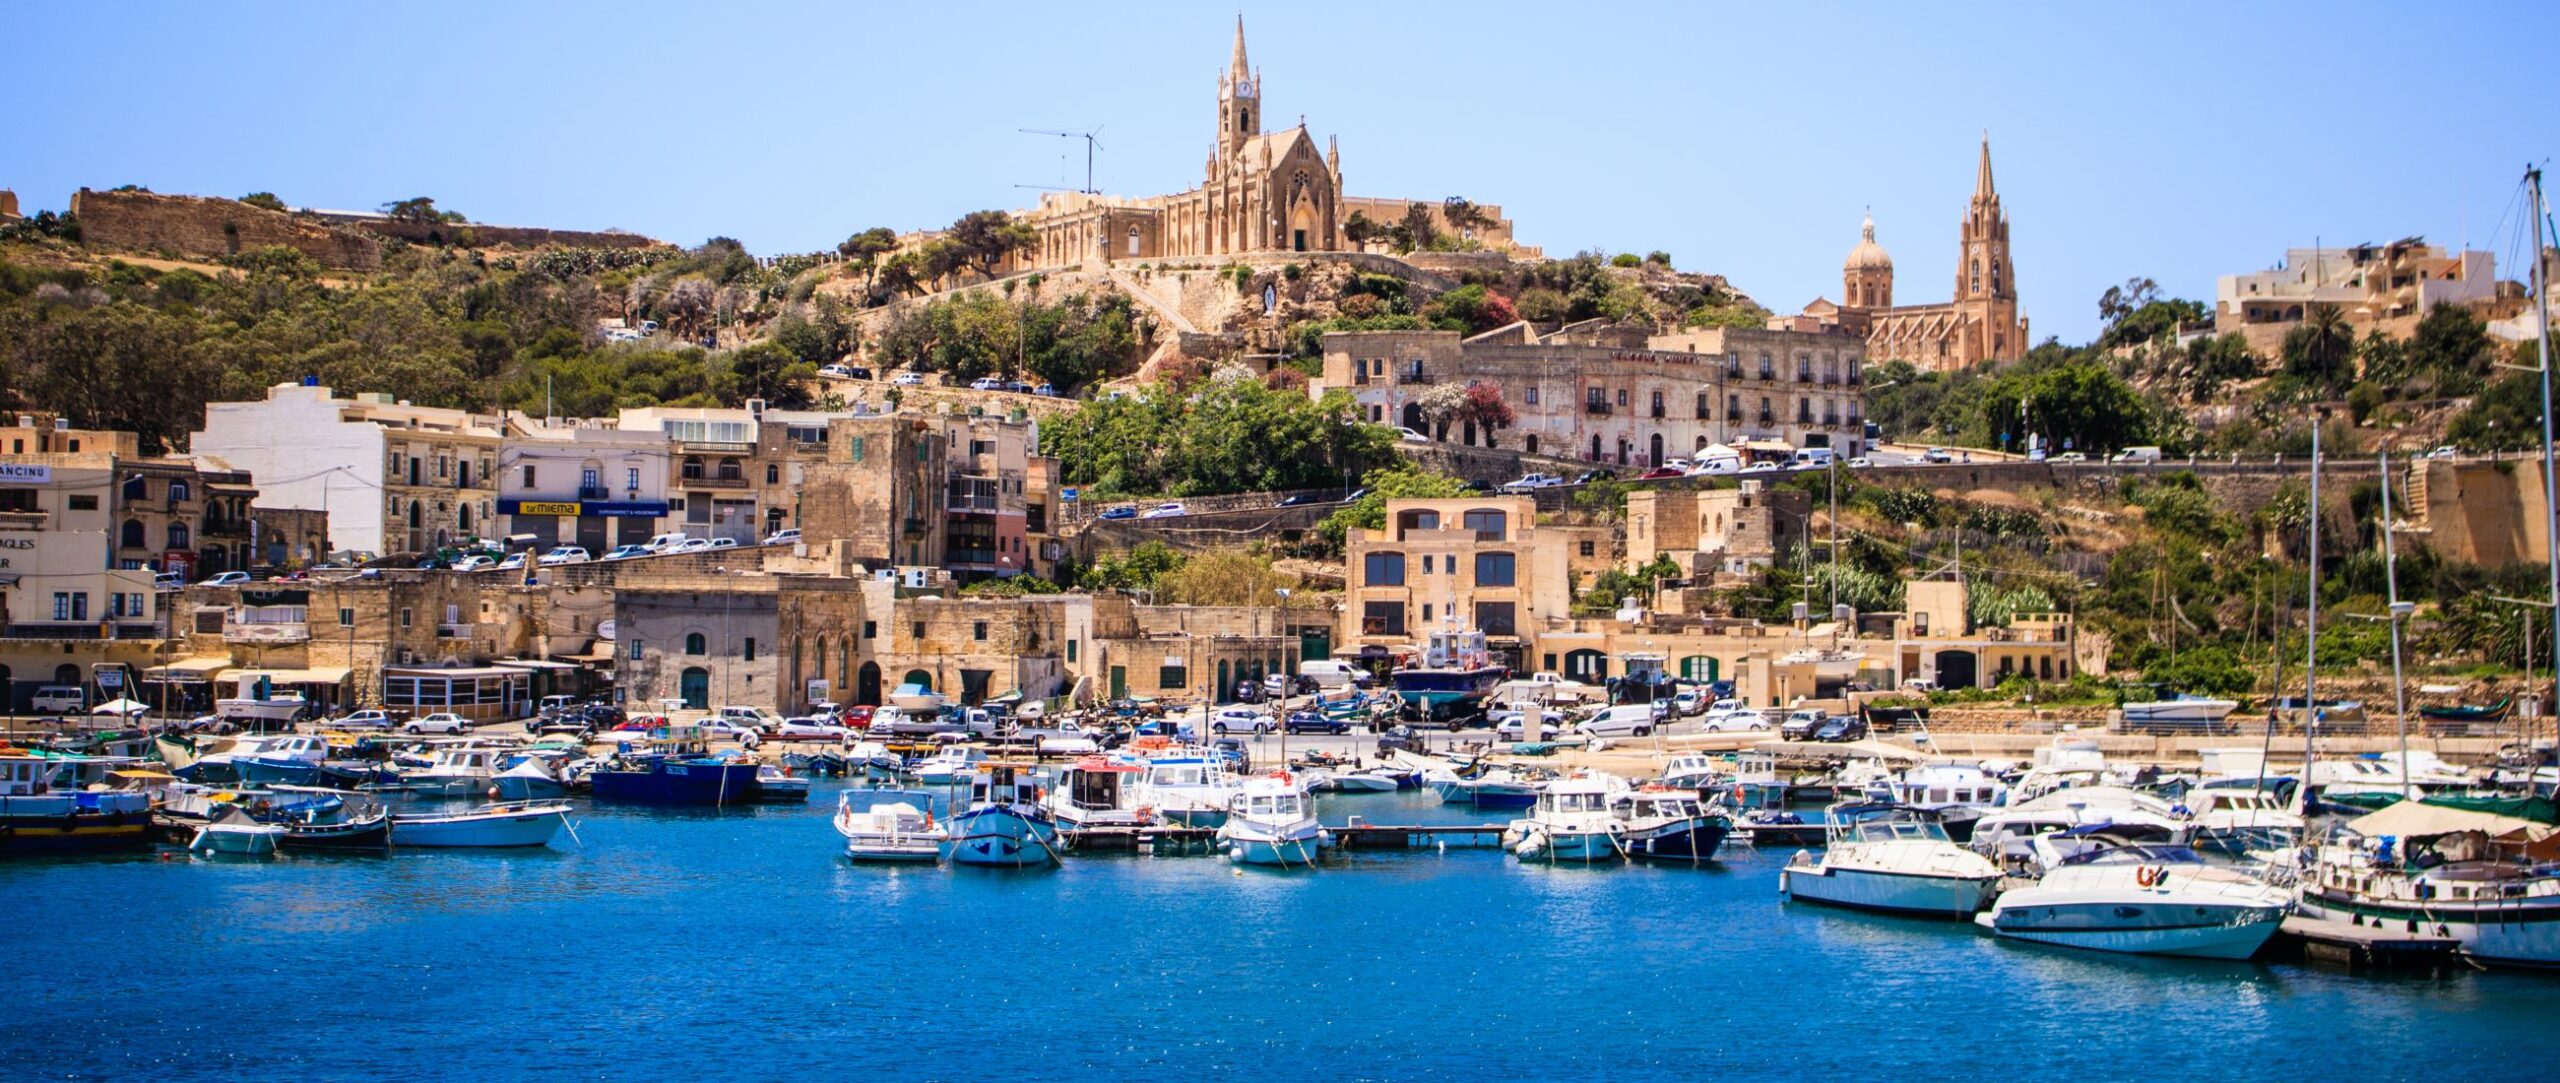 Exploring Gozo in 6 Easy Steps: The Places to Go and See